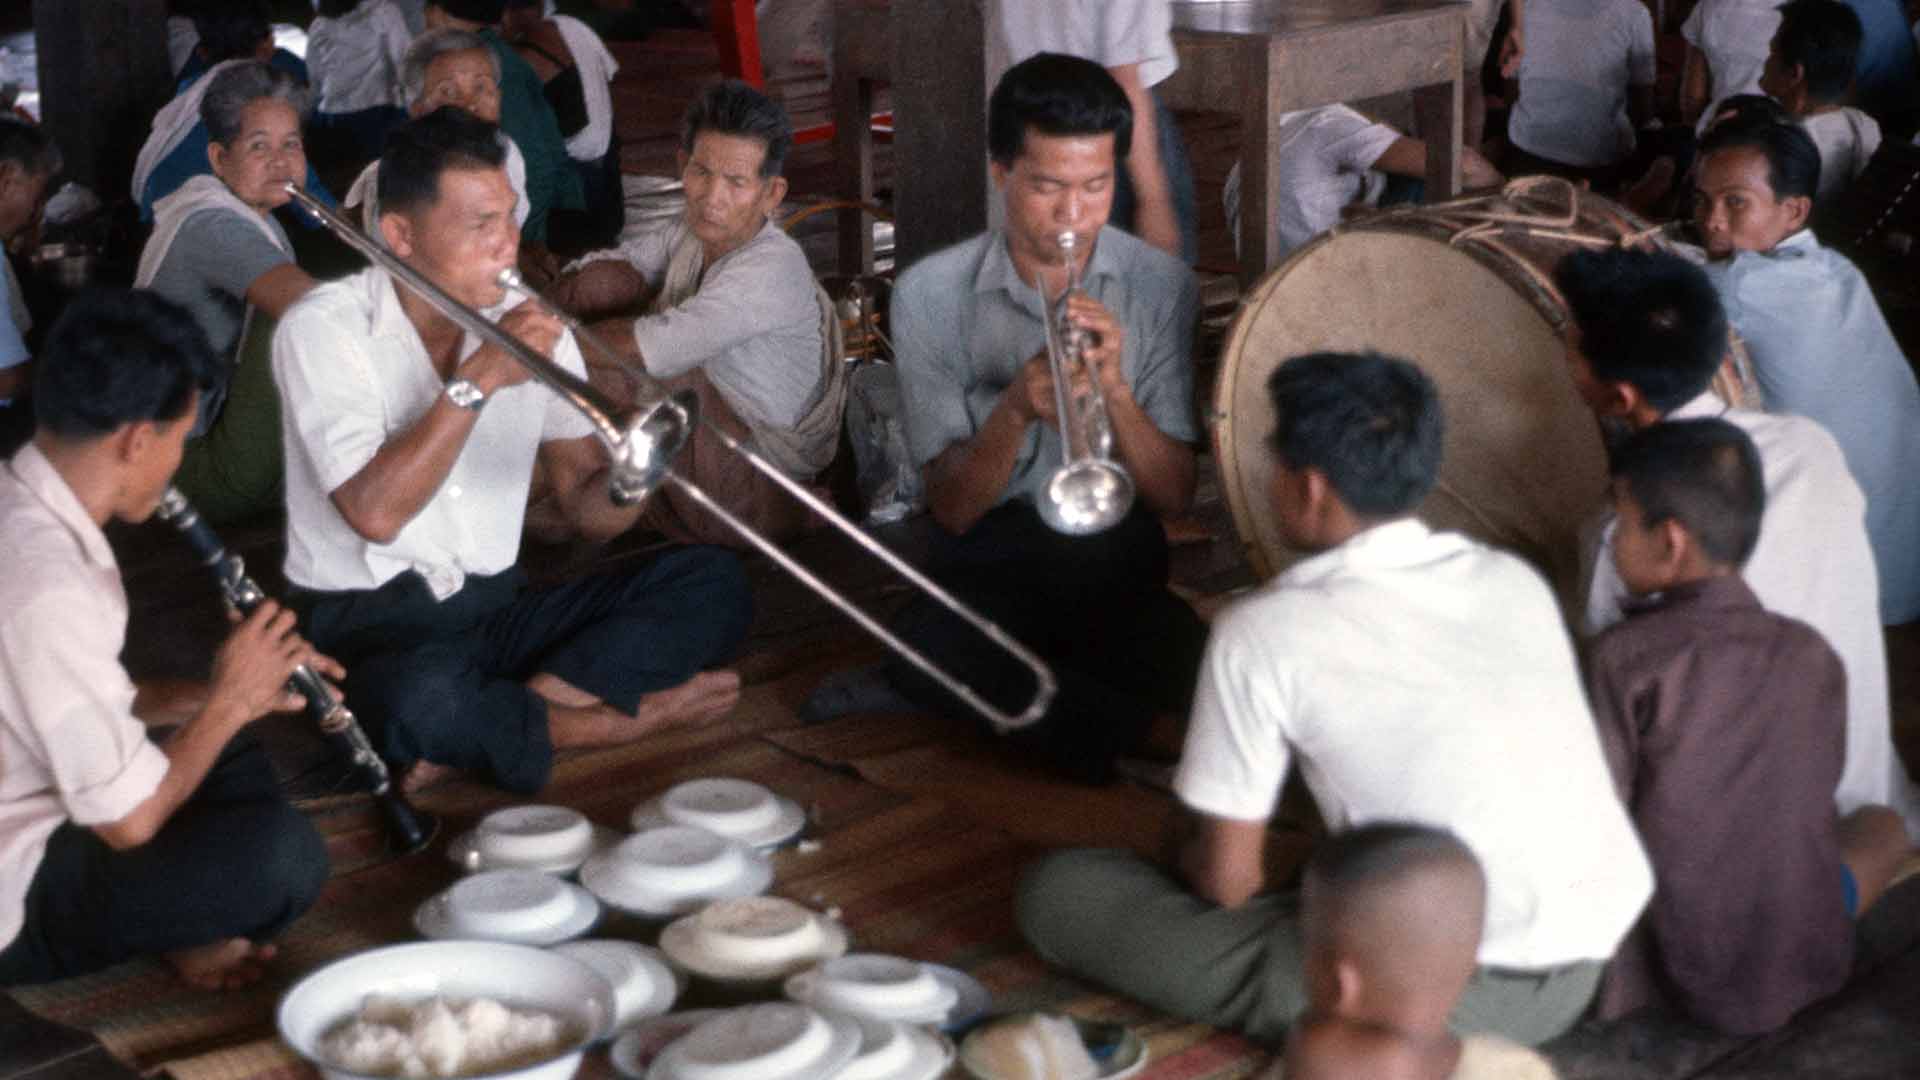 musicians seated playing music